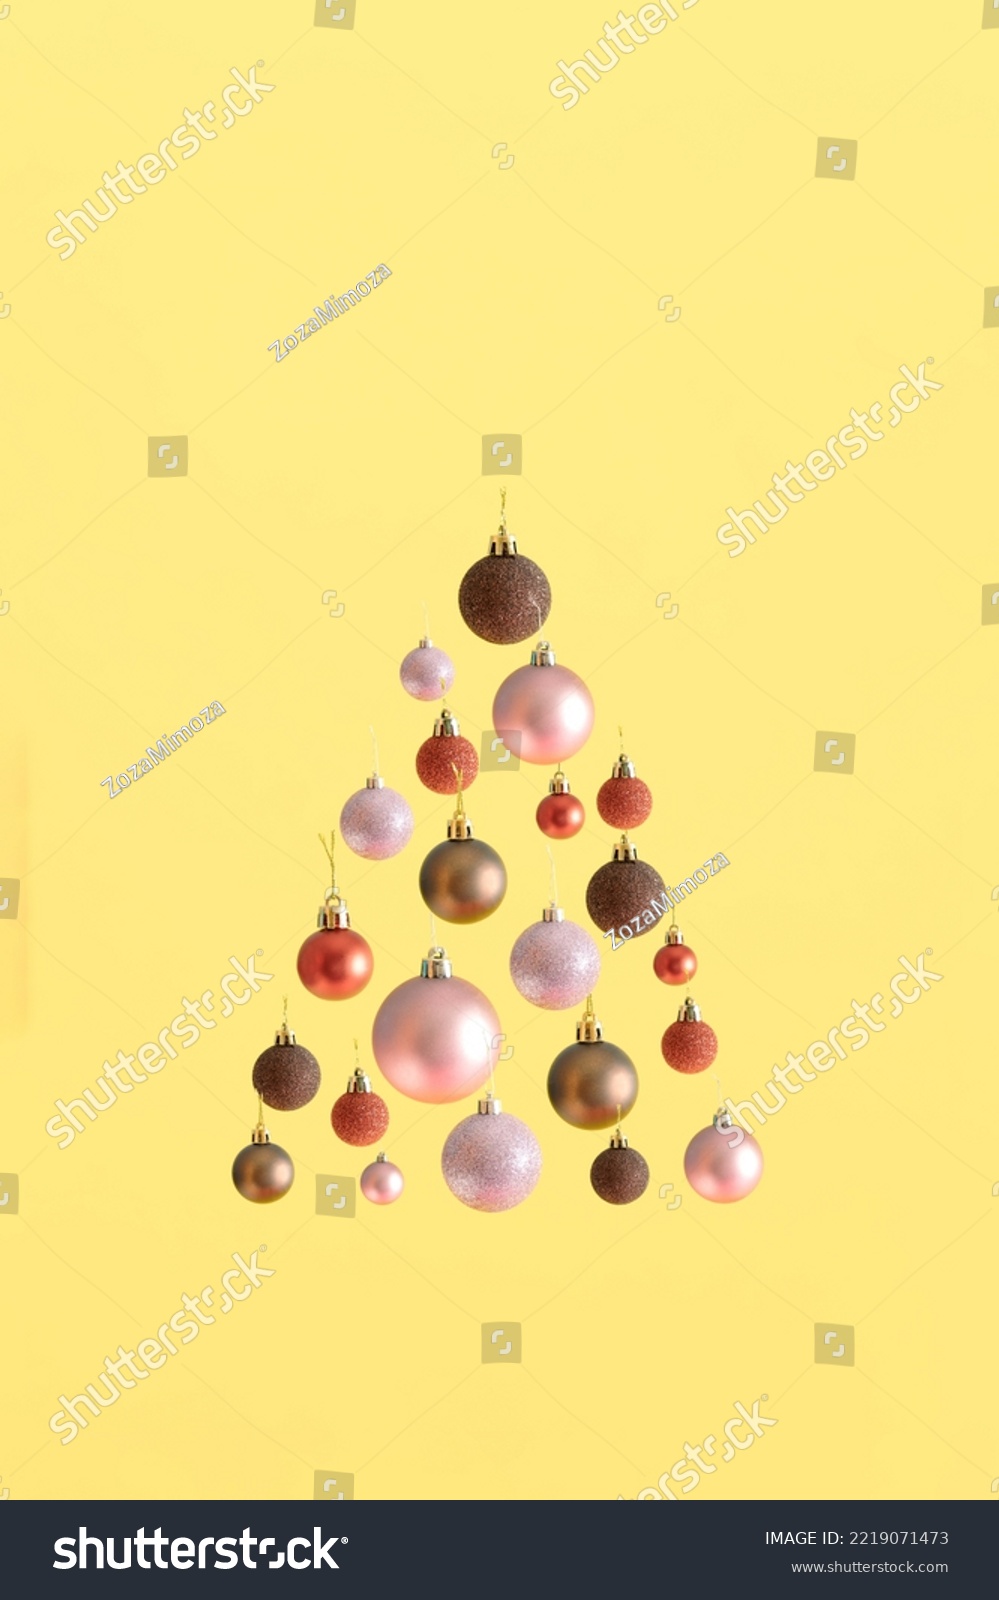 Modern aesthetic with Christmas tree shape made of colorful baubles against bold yellow background. Minimal New Year concept. Holiday spirit visual. #2219071473